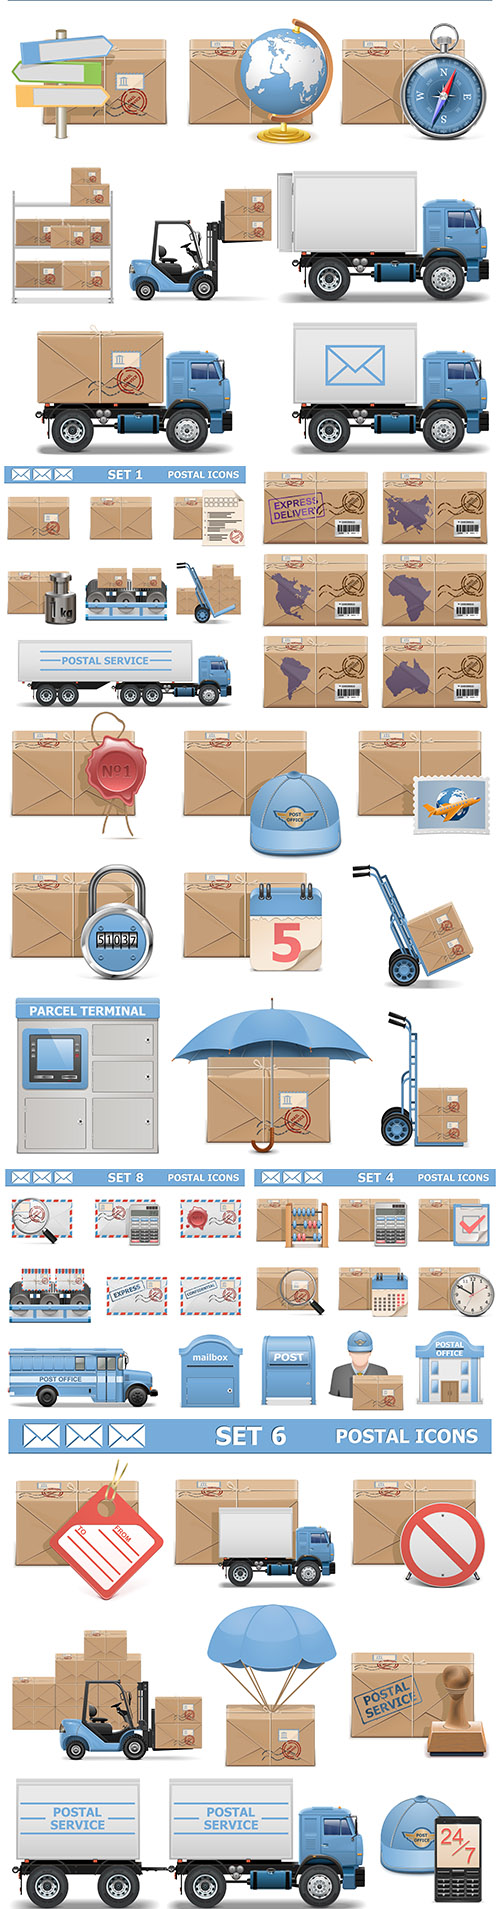 Mail icons and logistics delivery realistic design set
